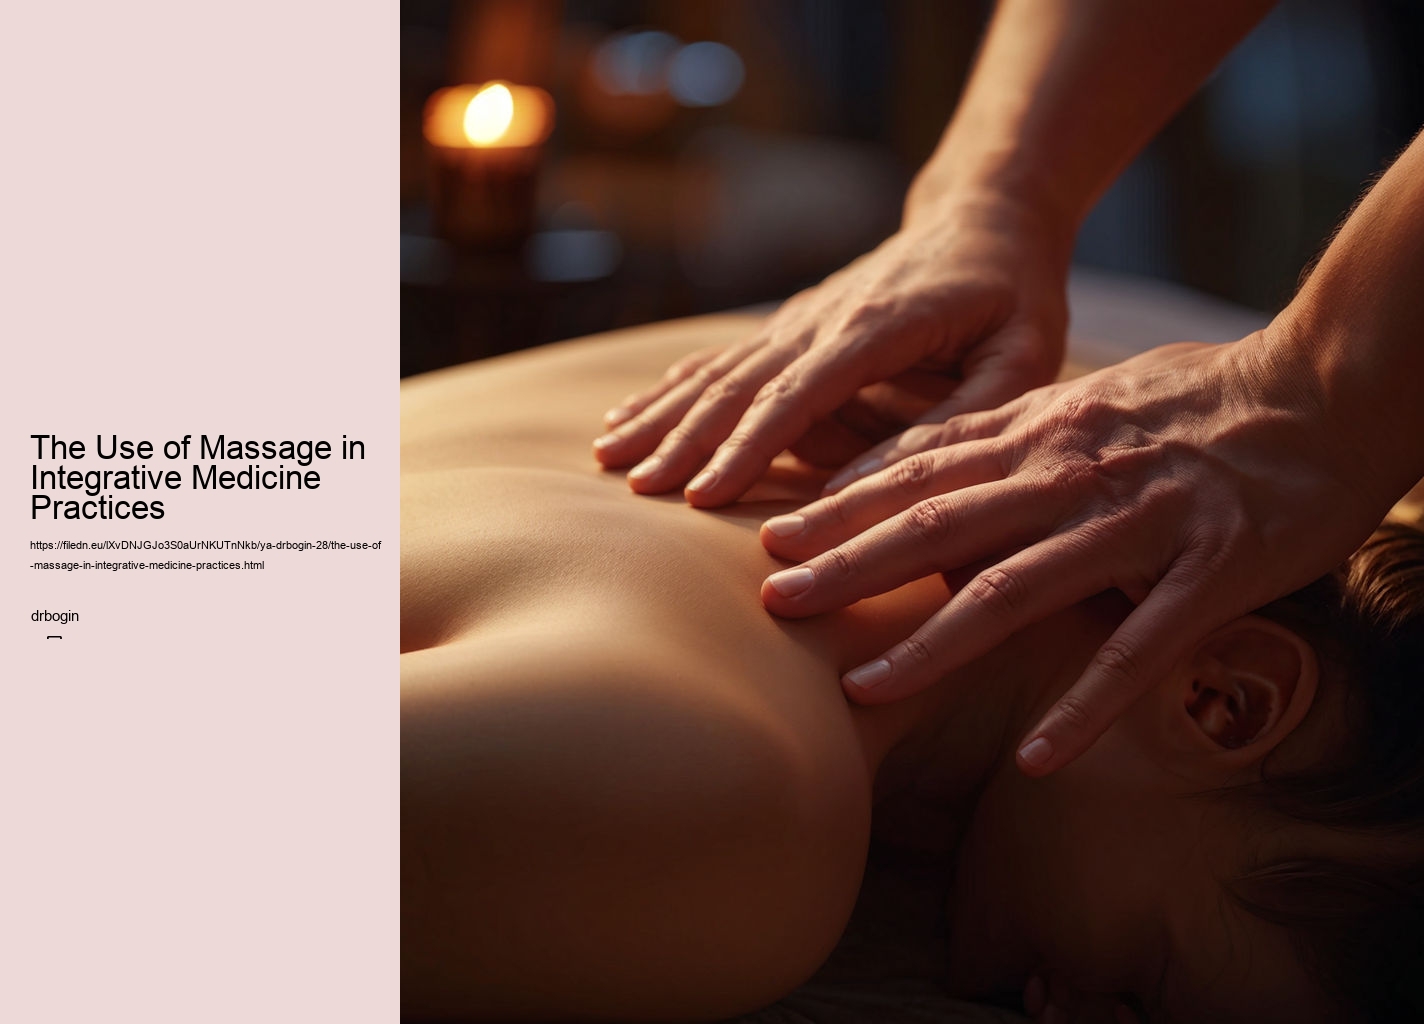 The Use of Massage in Integrative Medicine Practices